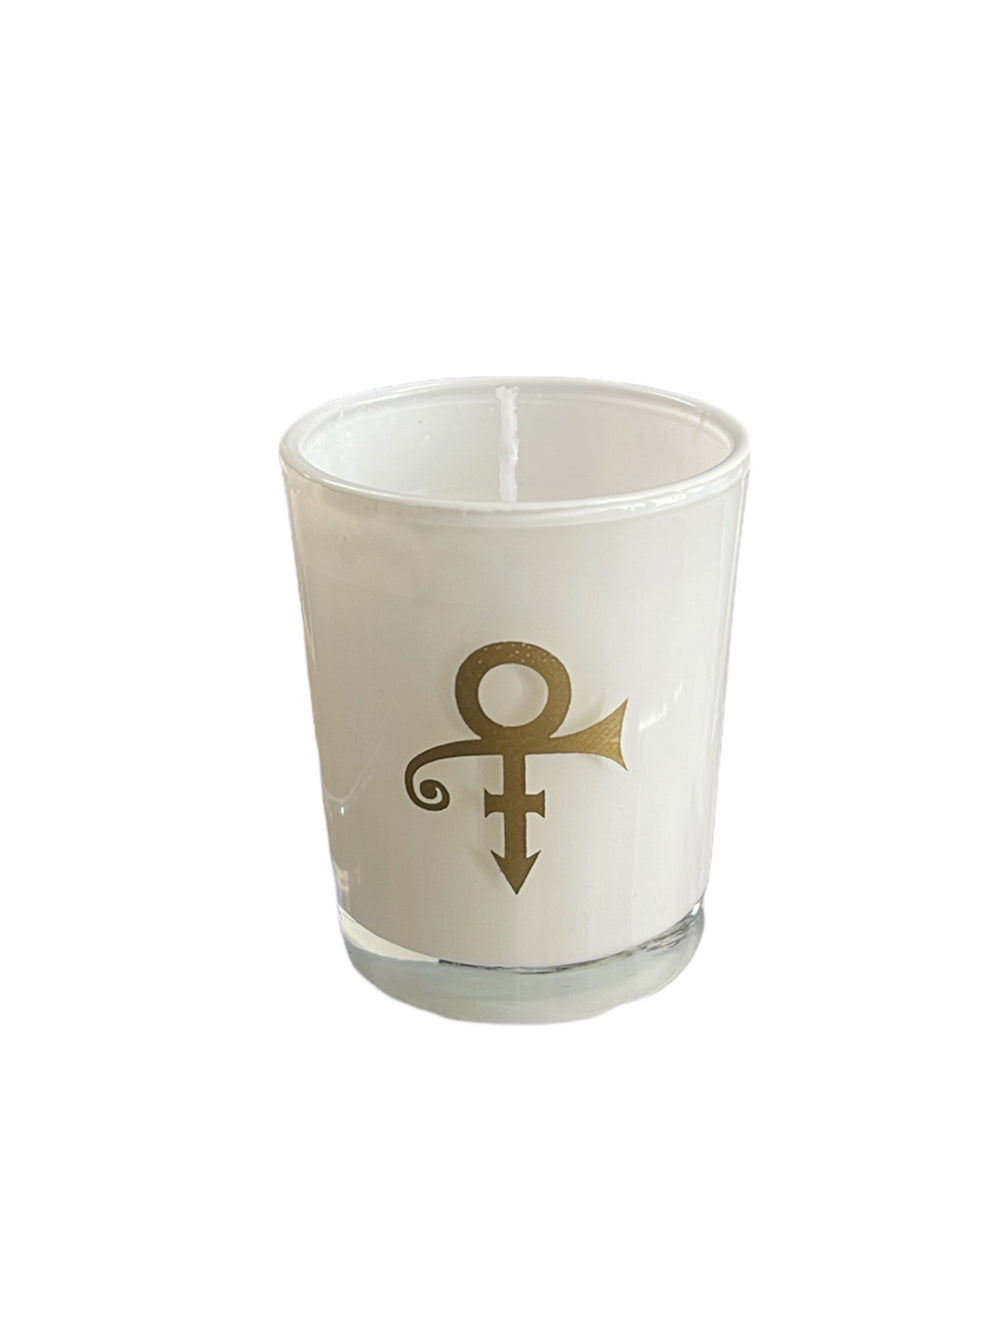 Prince – Gold Love Symbol White Candle XCLUSIVE Official Merchandise